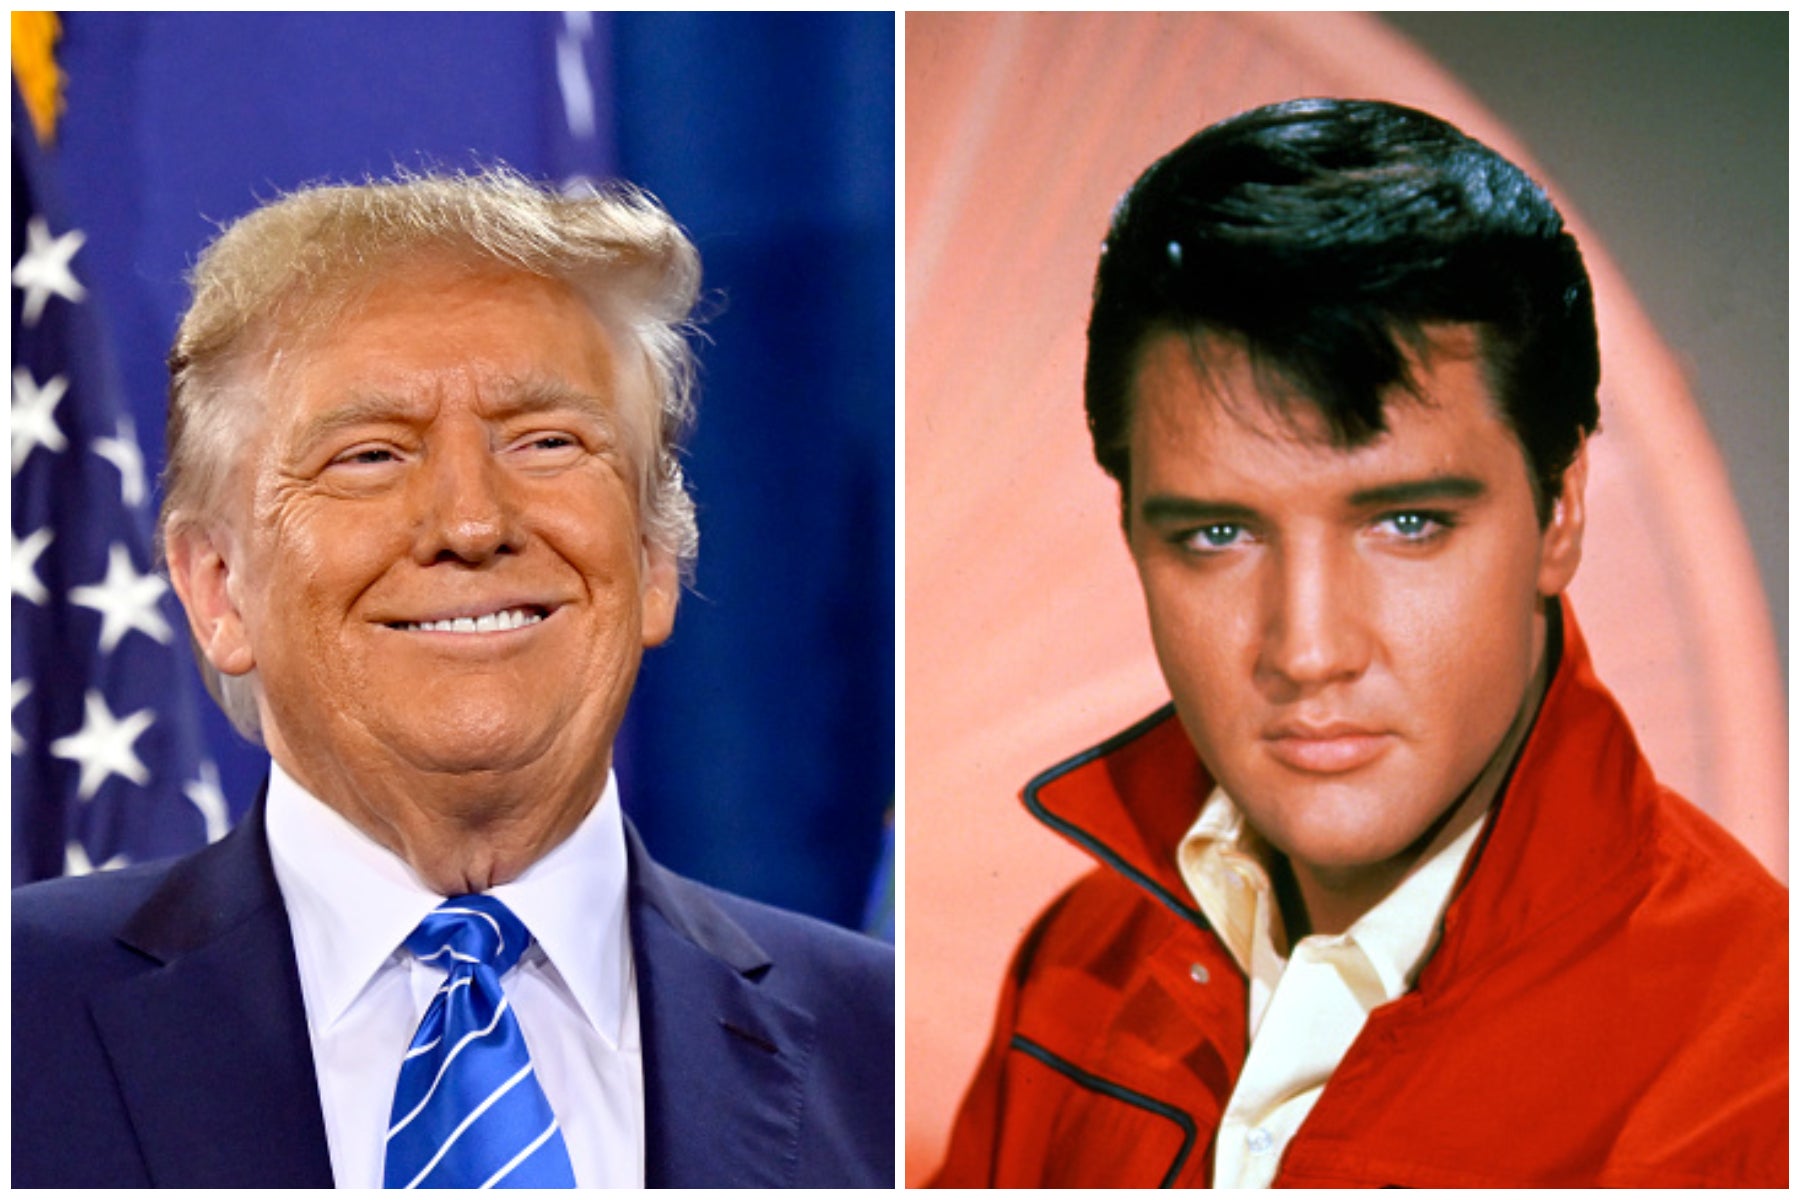 Donald Trump asked supporters whether he looked like Elvis Presley in a new Truth Social post